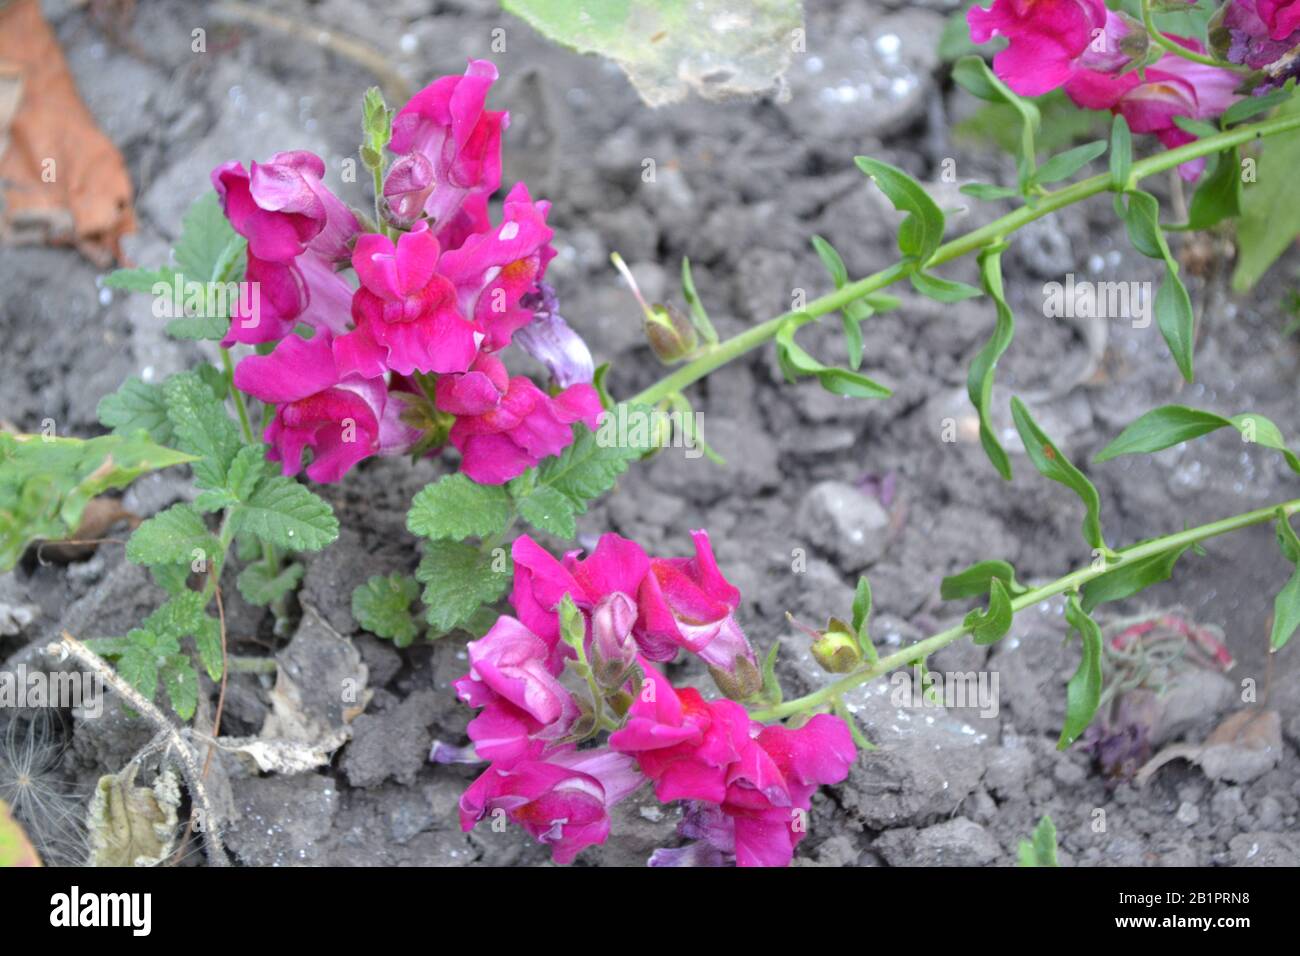 Snapdragon. Antirrhinum. Perennial. Beautiful unusual flower. Inflorescences of fuchsia-colored. Garden. A flower bed. Green leaves. Summer day. Horiz Stock Photo